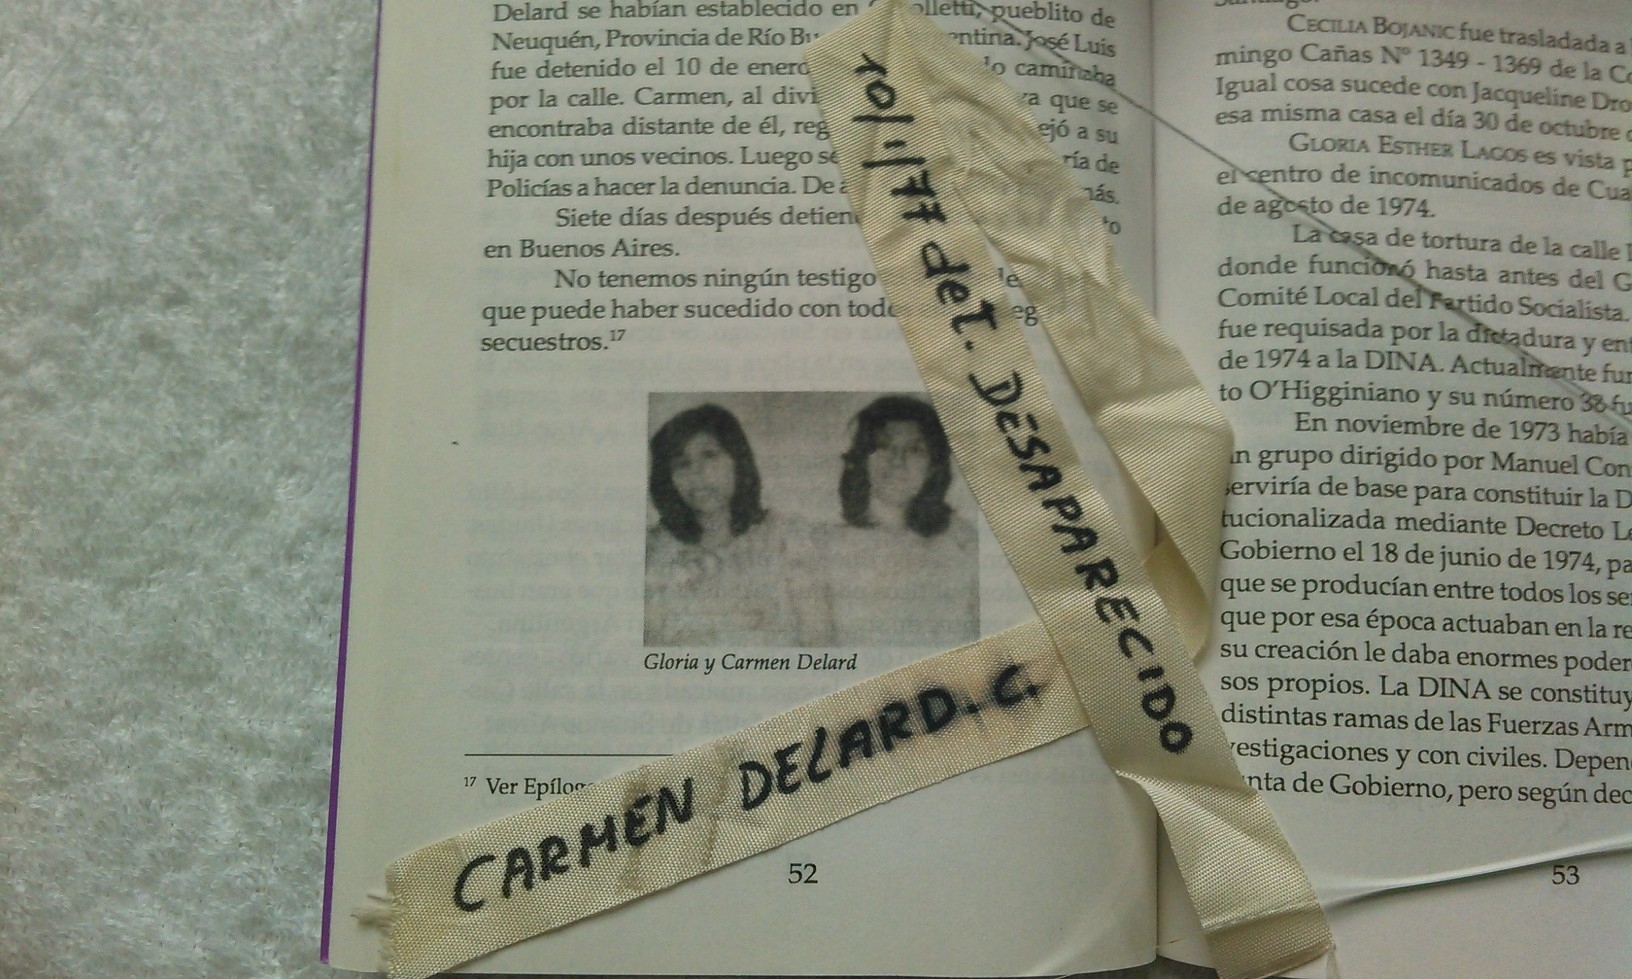 'Cinta conmemorativa / symbolic ribbon', Carried by an Abuela de Plaza de Mayo in a 1986 march denouncing the detention and disappearance of Chilean Carmen Delard on the 10th January 1977 in
Argentina. (Photo: Eva Gonzalez)